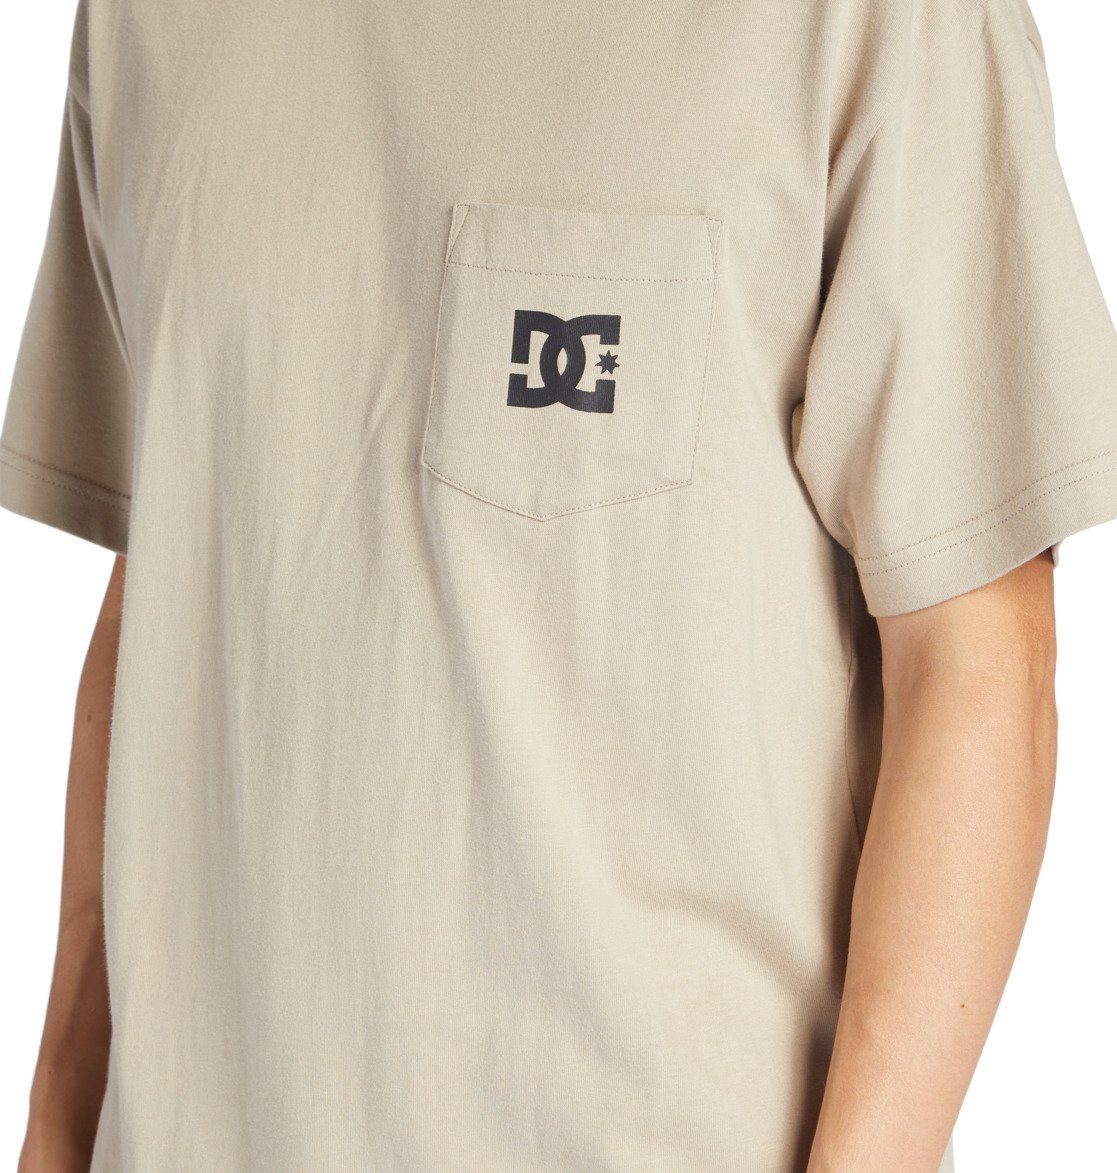 T-Shirt DC Taupe DC Star Plaza Shoes